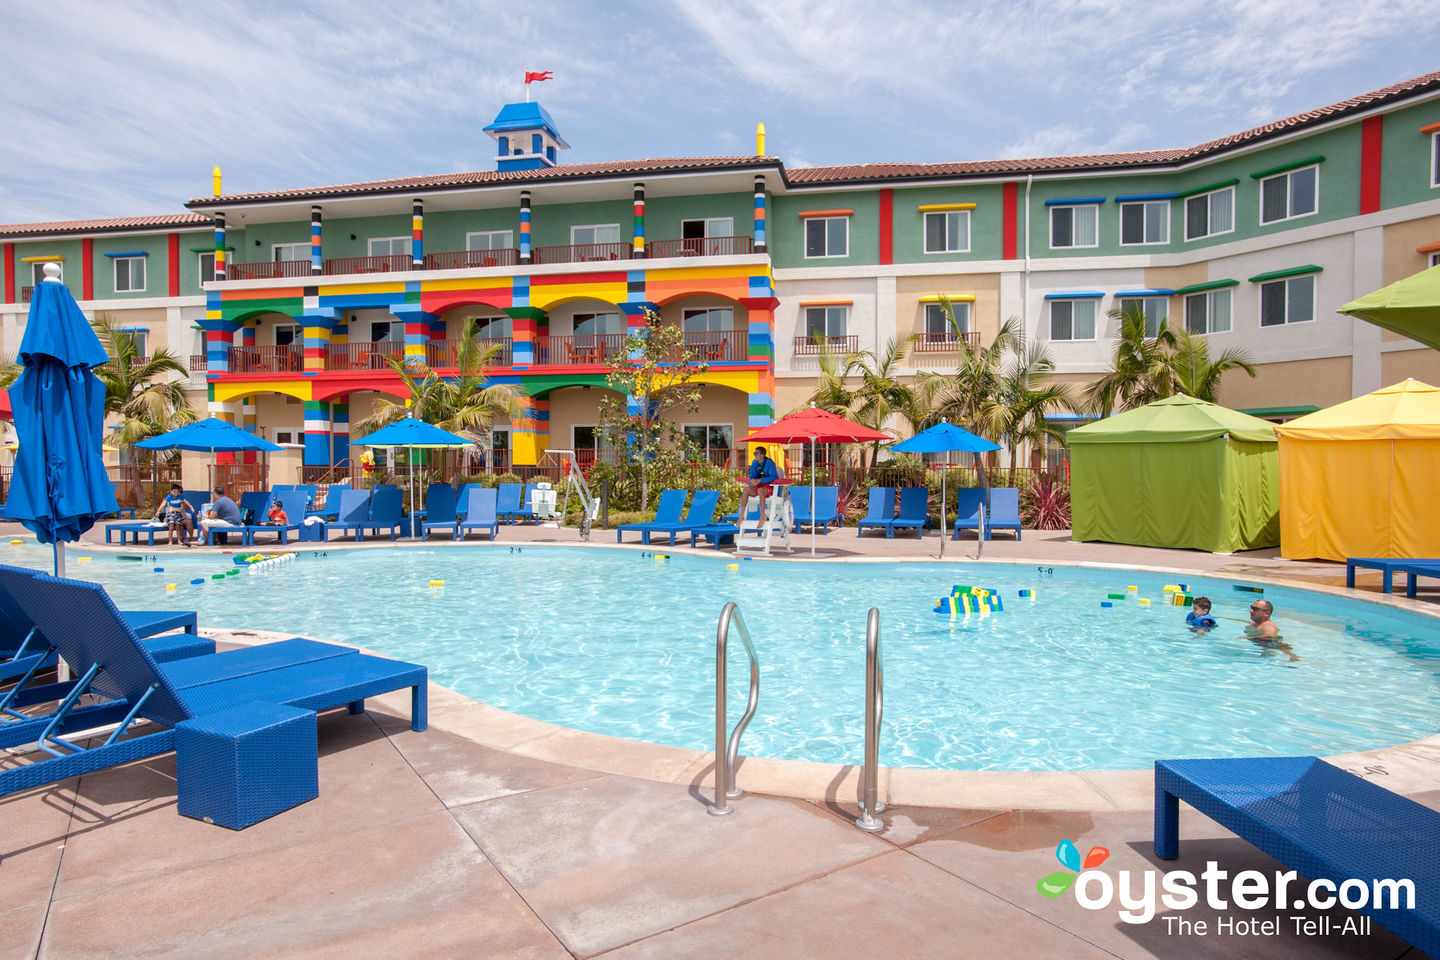 LEGOLAND California Hotel Review: What To Expect If You Stay